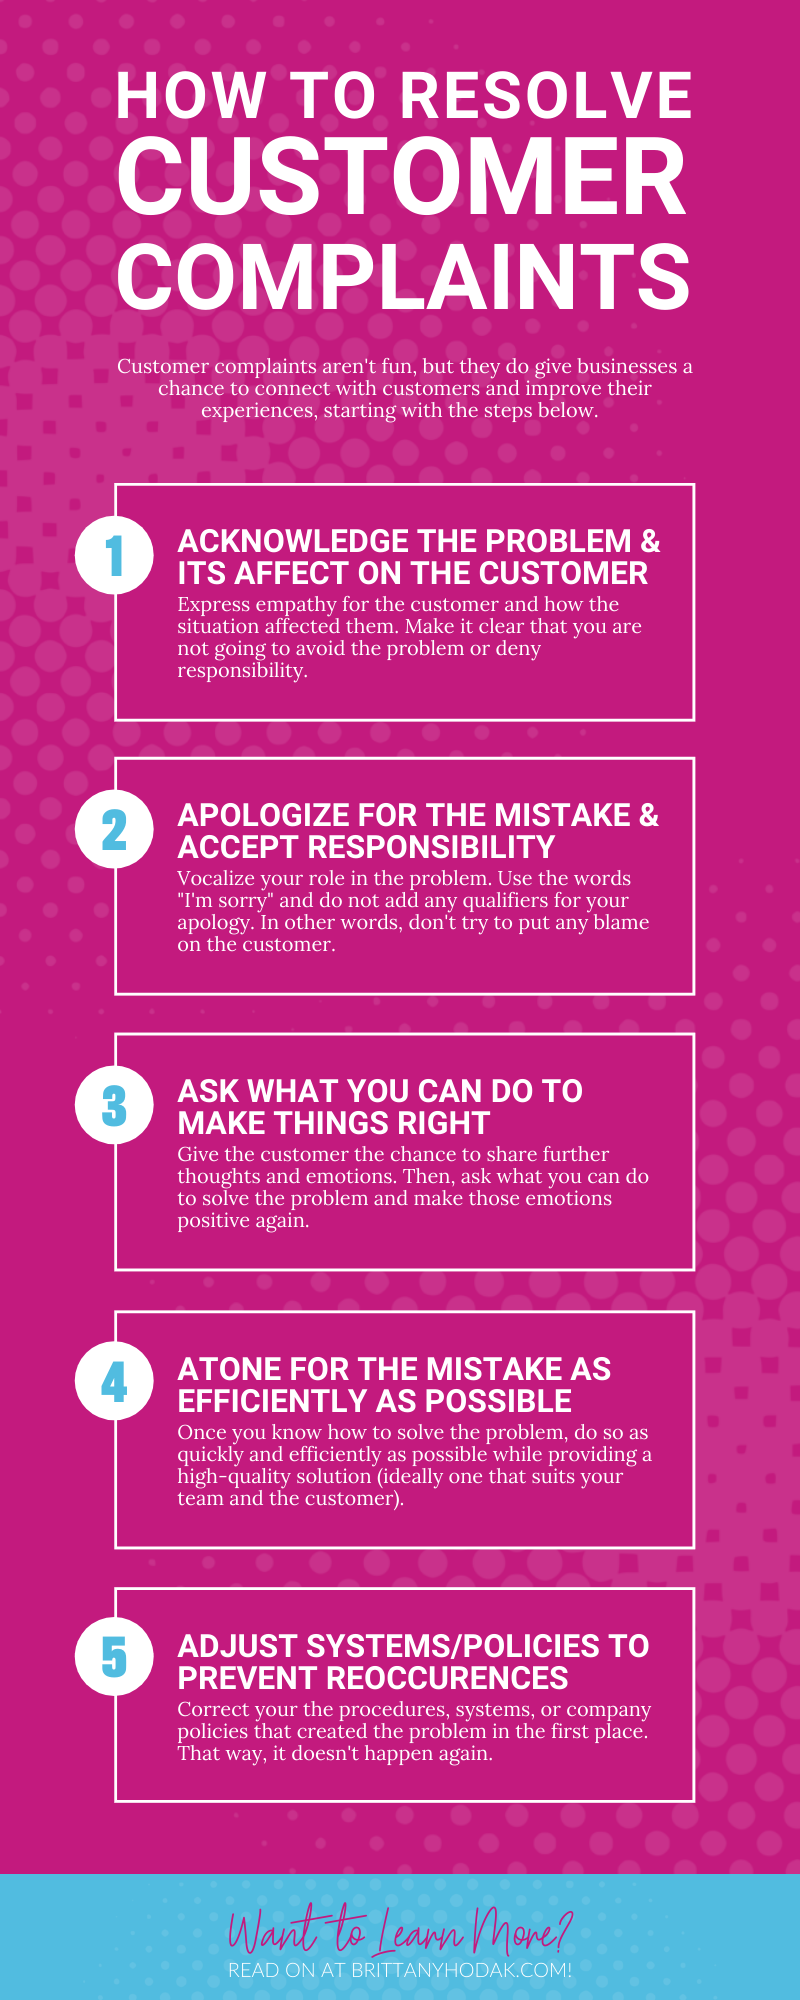 How To Resolve Customer Complaints In 5 Steps | Brittany Hodak